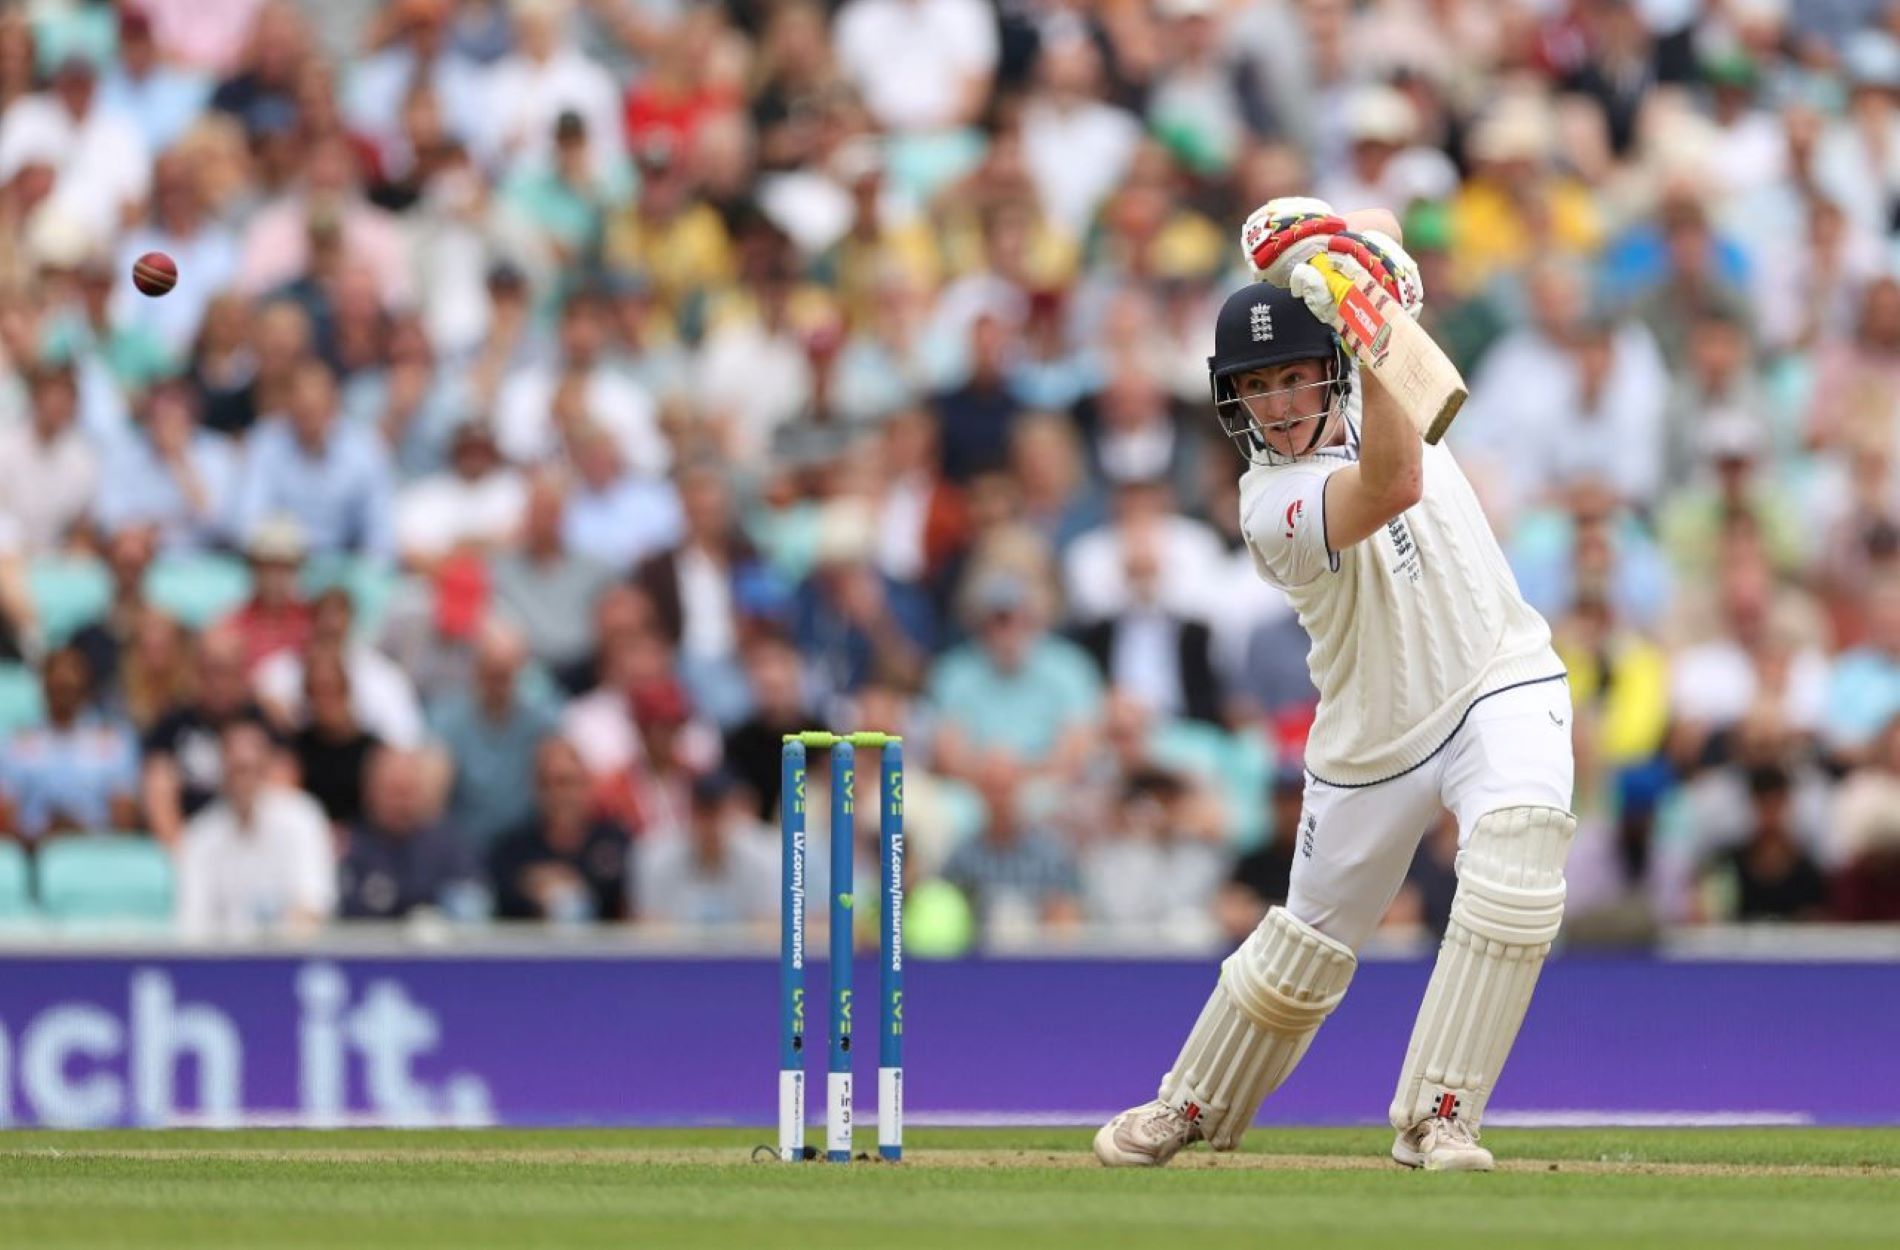 Harry Brook saved England from the blushes on Day 1 at the Oval